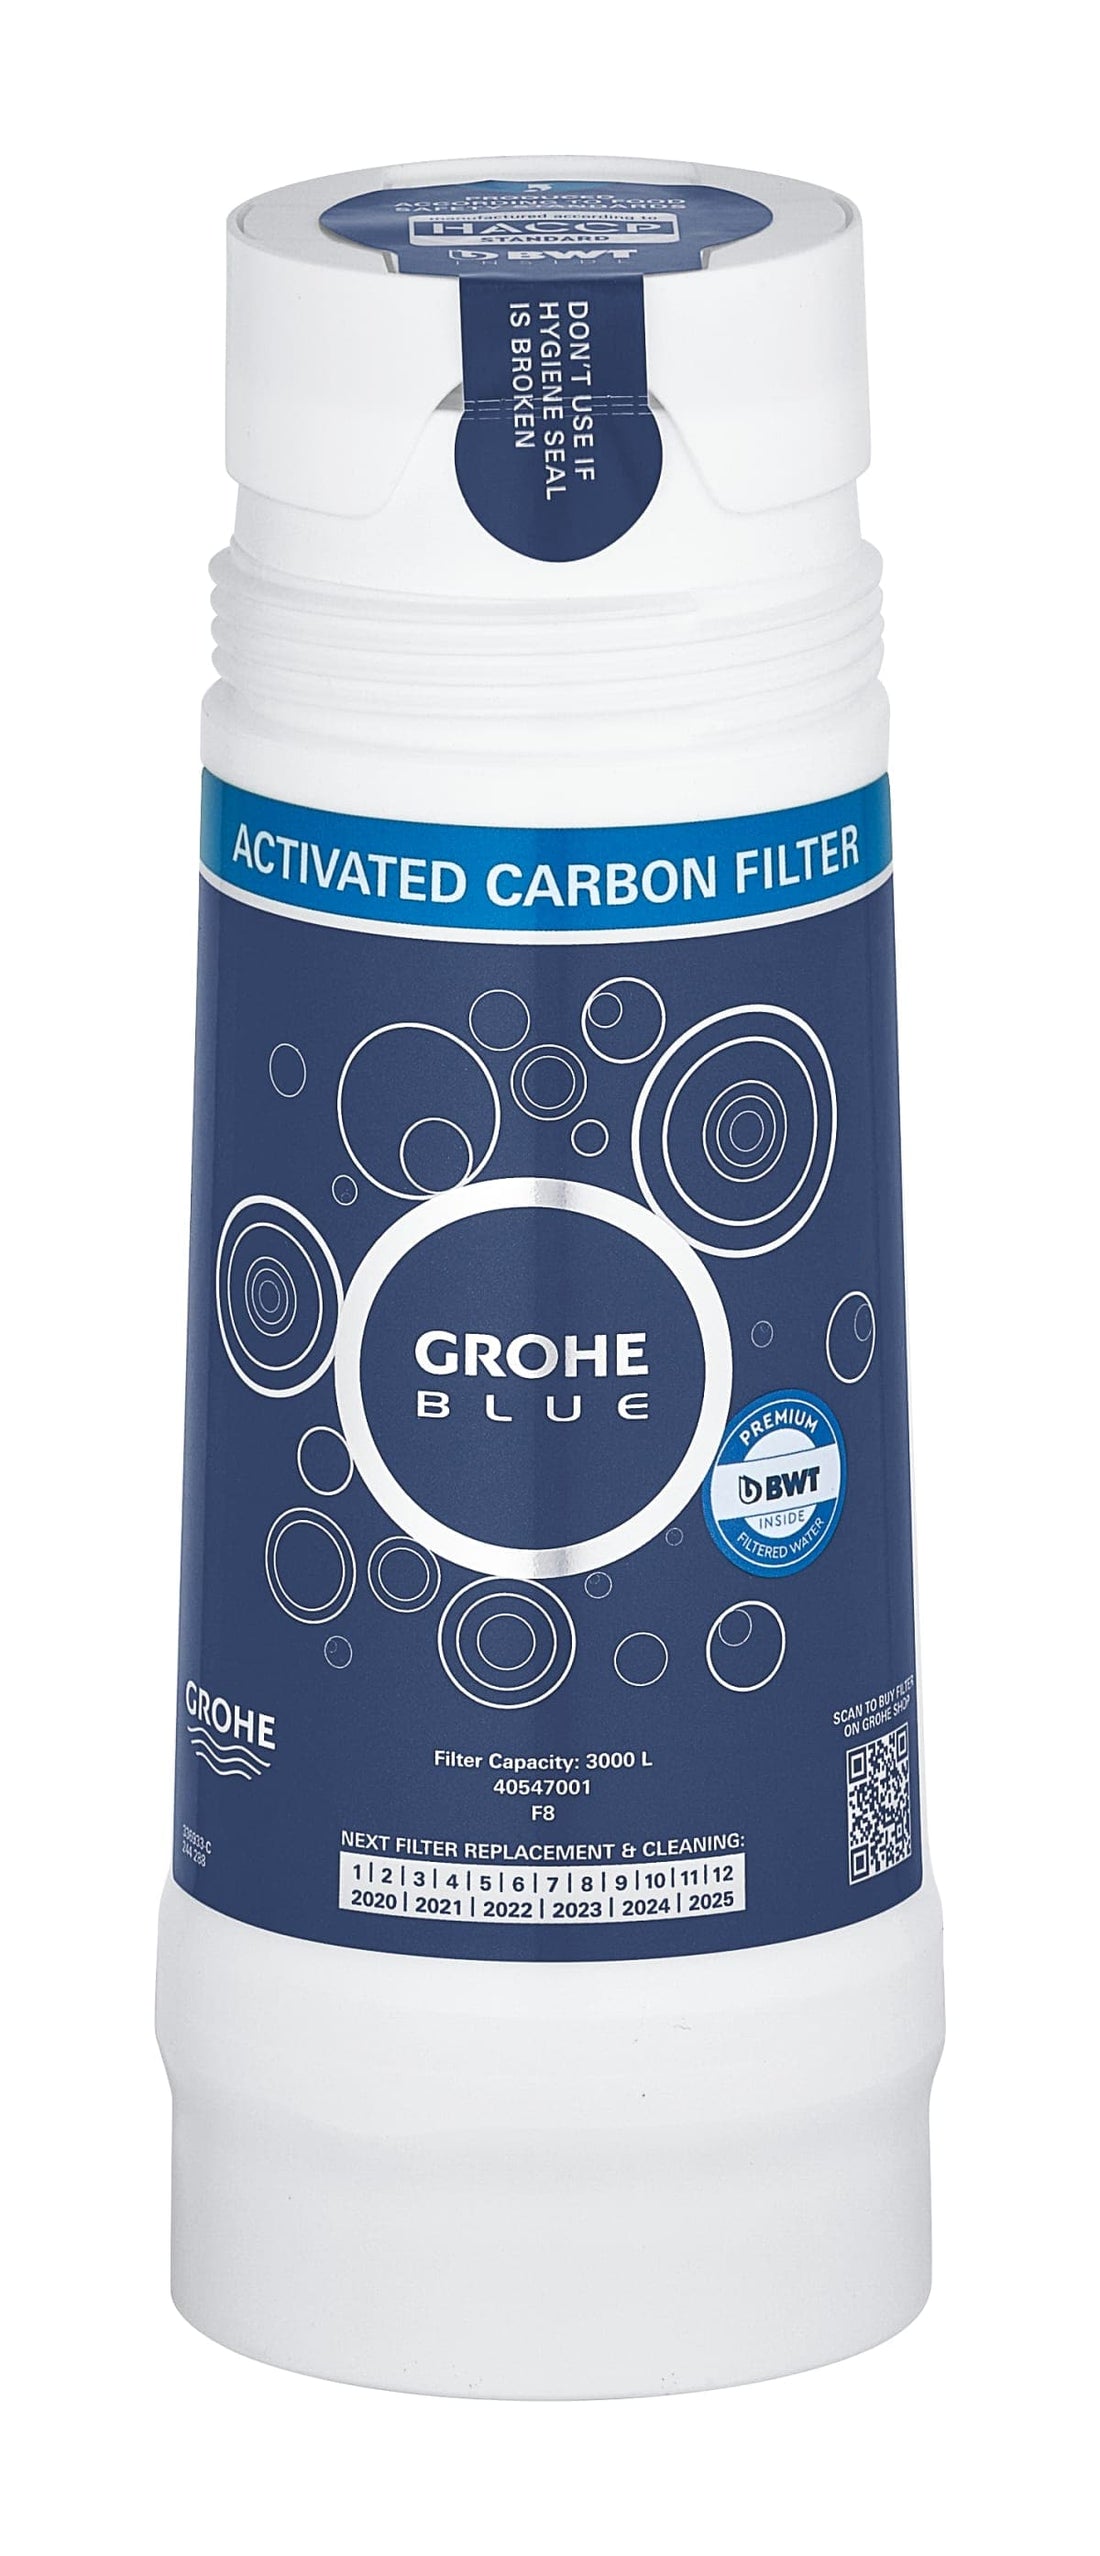 GROHE BLUE ACTIVE CARBON FILTER - (improves taste and smell) - best price from Maltashopper.com BR430007836